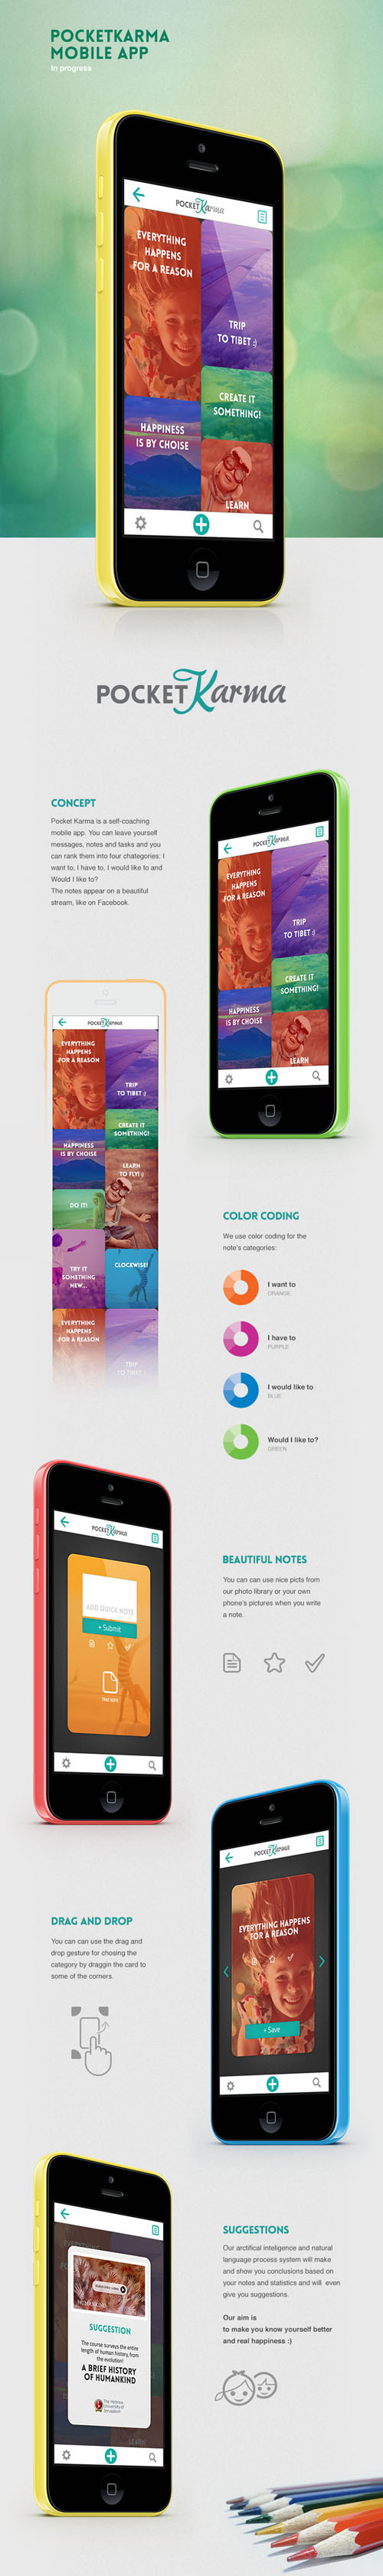 Amazing Mobile App UI Designs with Ultimate User Experience - 45